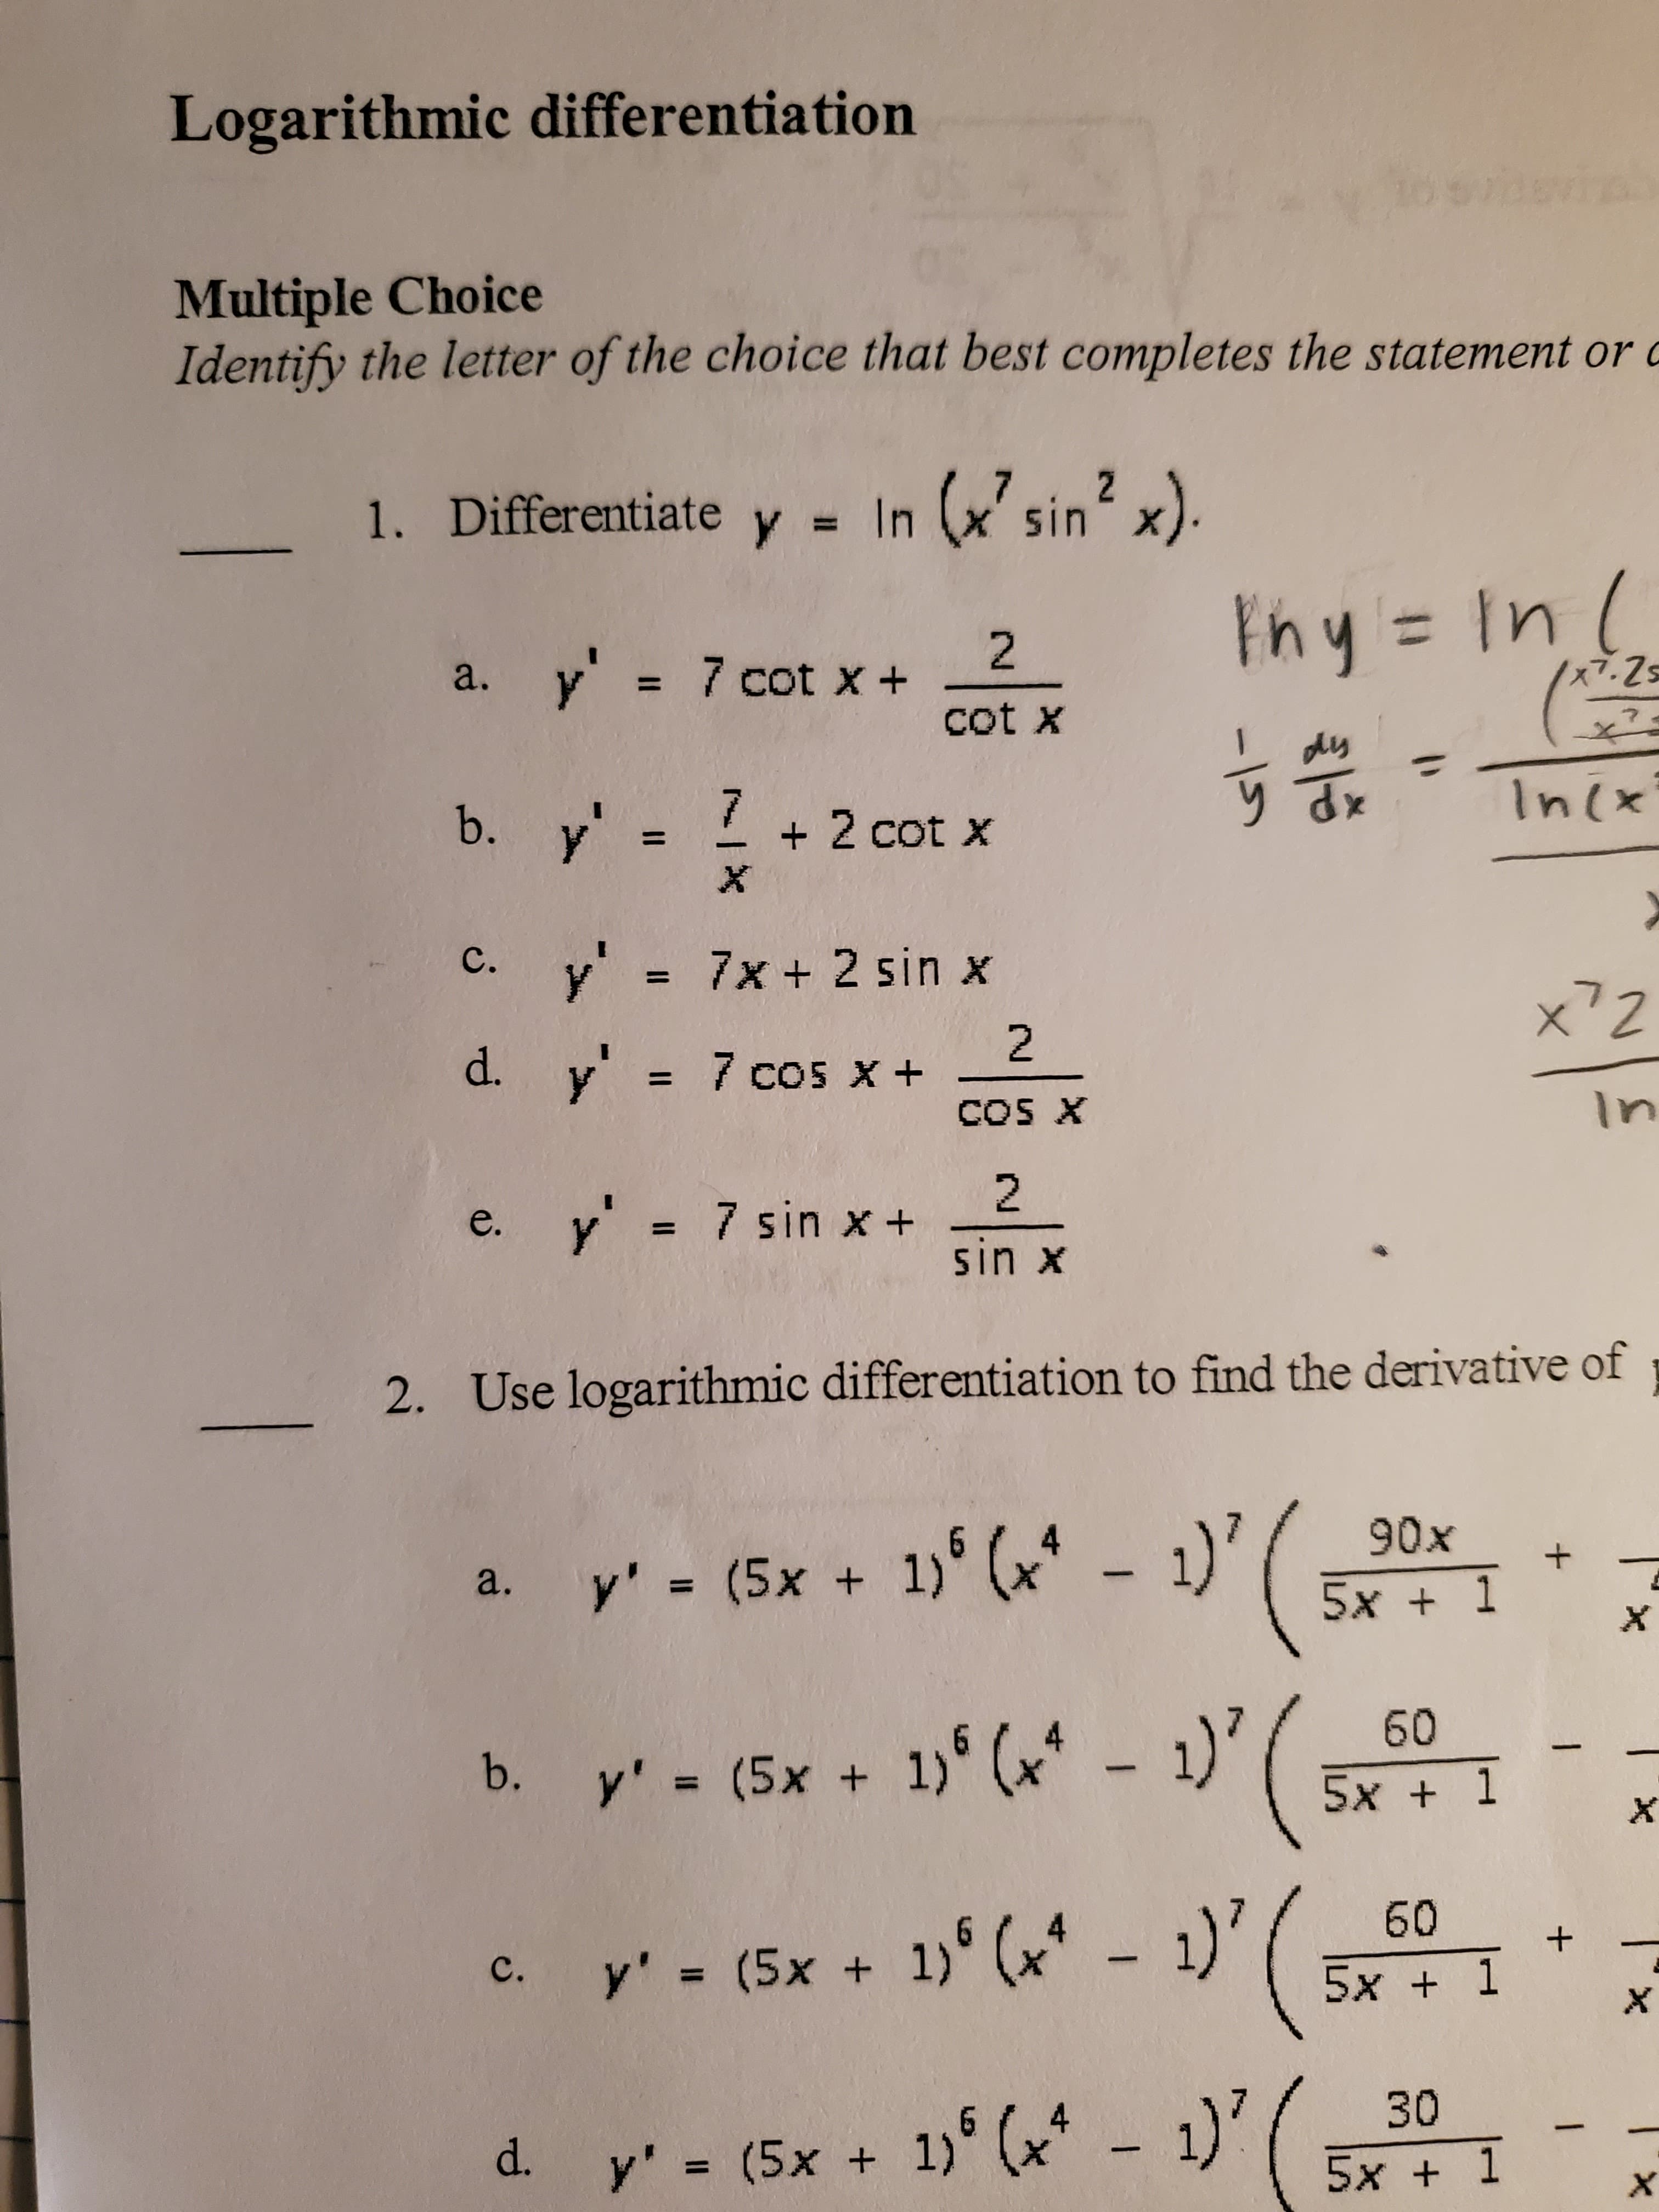 Logarithmic differentiation
Multiple Choice
Identify the letter of the choice that best completes the statement or c
7 2
(sin2 x)
1. Differentiate y = In
Fhy In
2
y
7 cot x
x7.Zs
a.
cot X
7
In(x
7 2 cot X
b. y' =
X
с.
7x+ 2 sin x
y
x72
2
d. y= 7 cos x +
1
In
COS X
2
7 sin x +
y
sin x
Use logarithmic differentiation to find the derivative of
2.
90x
5x 1
y' = (5x + 1) (x
a.
X
60
y (5x + 1 ( - 1)
b.
5x 1
60
y' = (5x + 1) (x - 1)
с.
5х + 1
X
30
1' (-1)'
d.
y' = (5x +
5x 1
X
Tx
+
+
r
